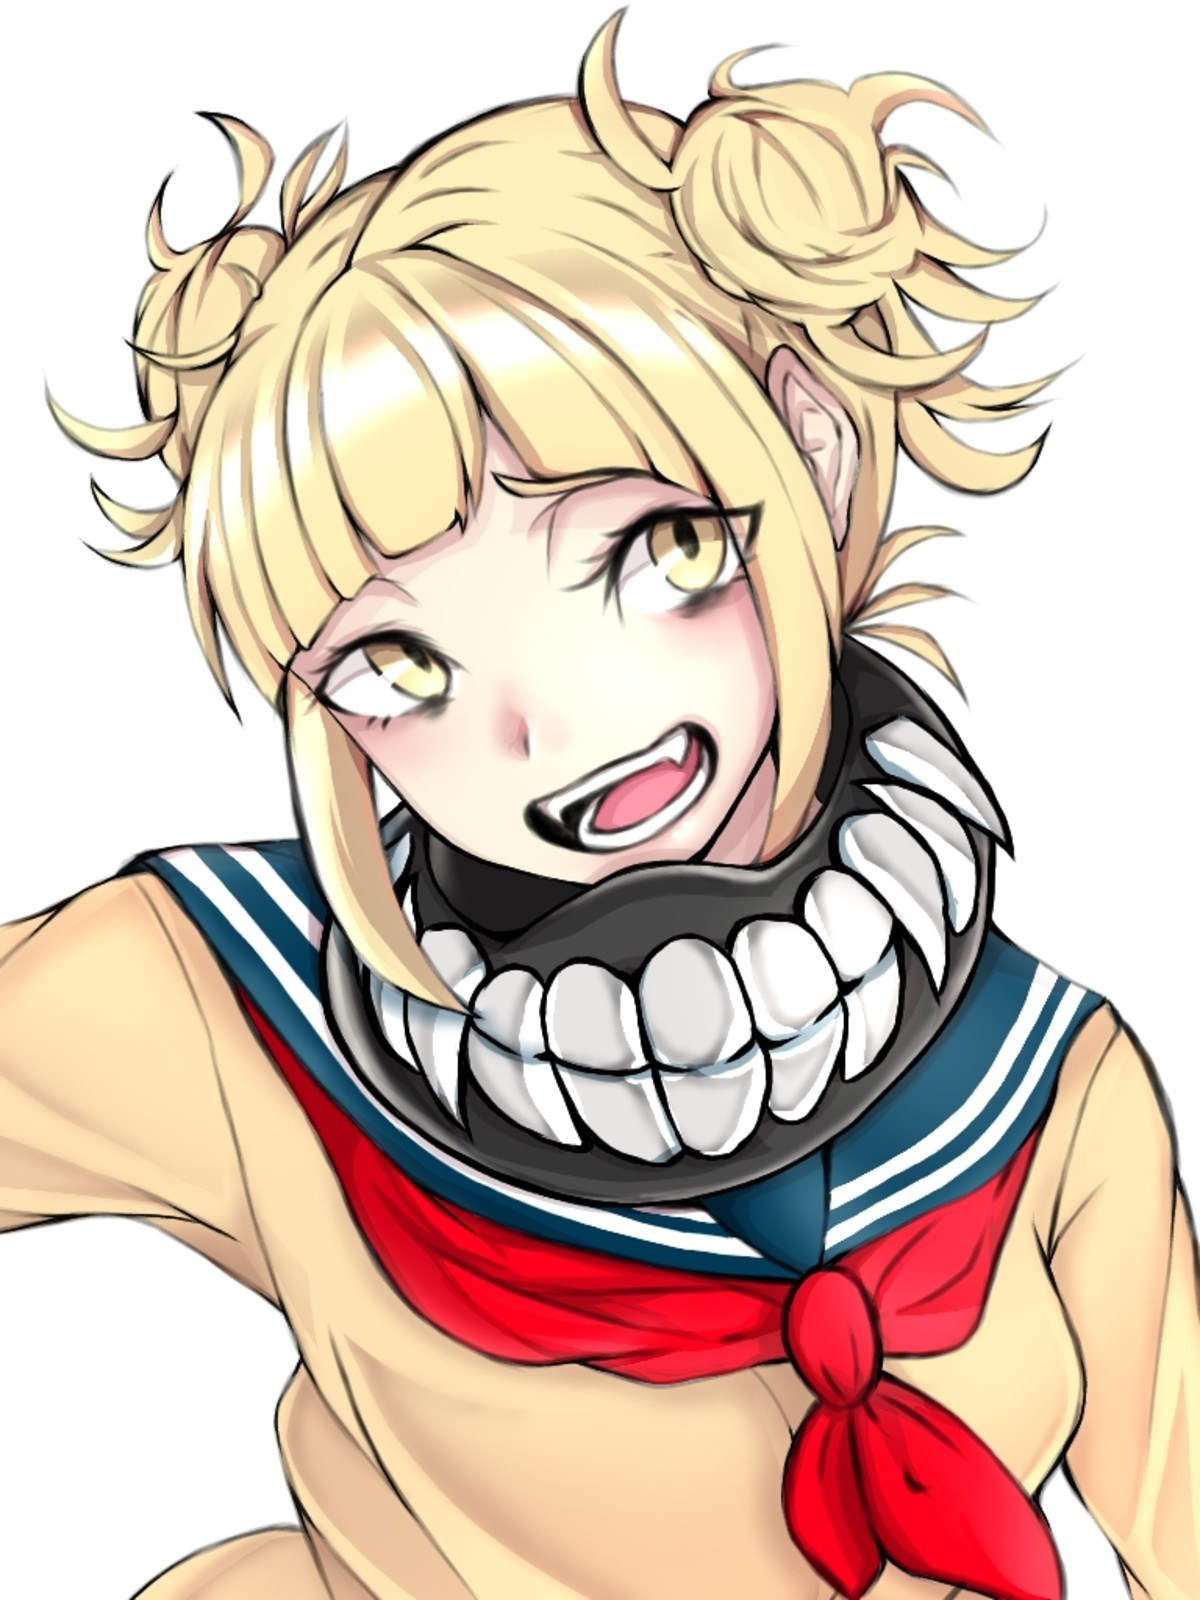 Daily Toga - 815: Happy Toga. join list: DailyToga (476 subs)Mention History Source: .. Blacksmithpanzer